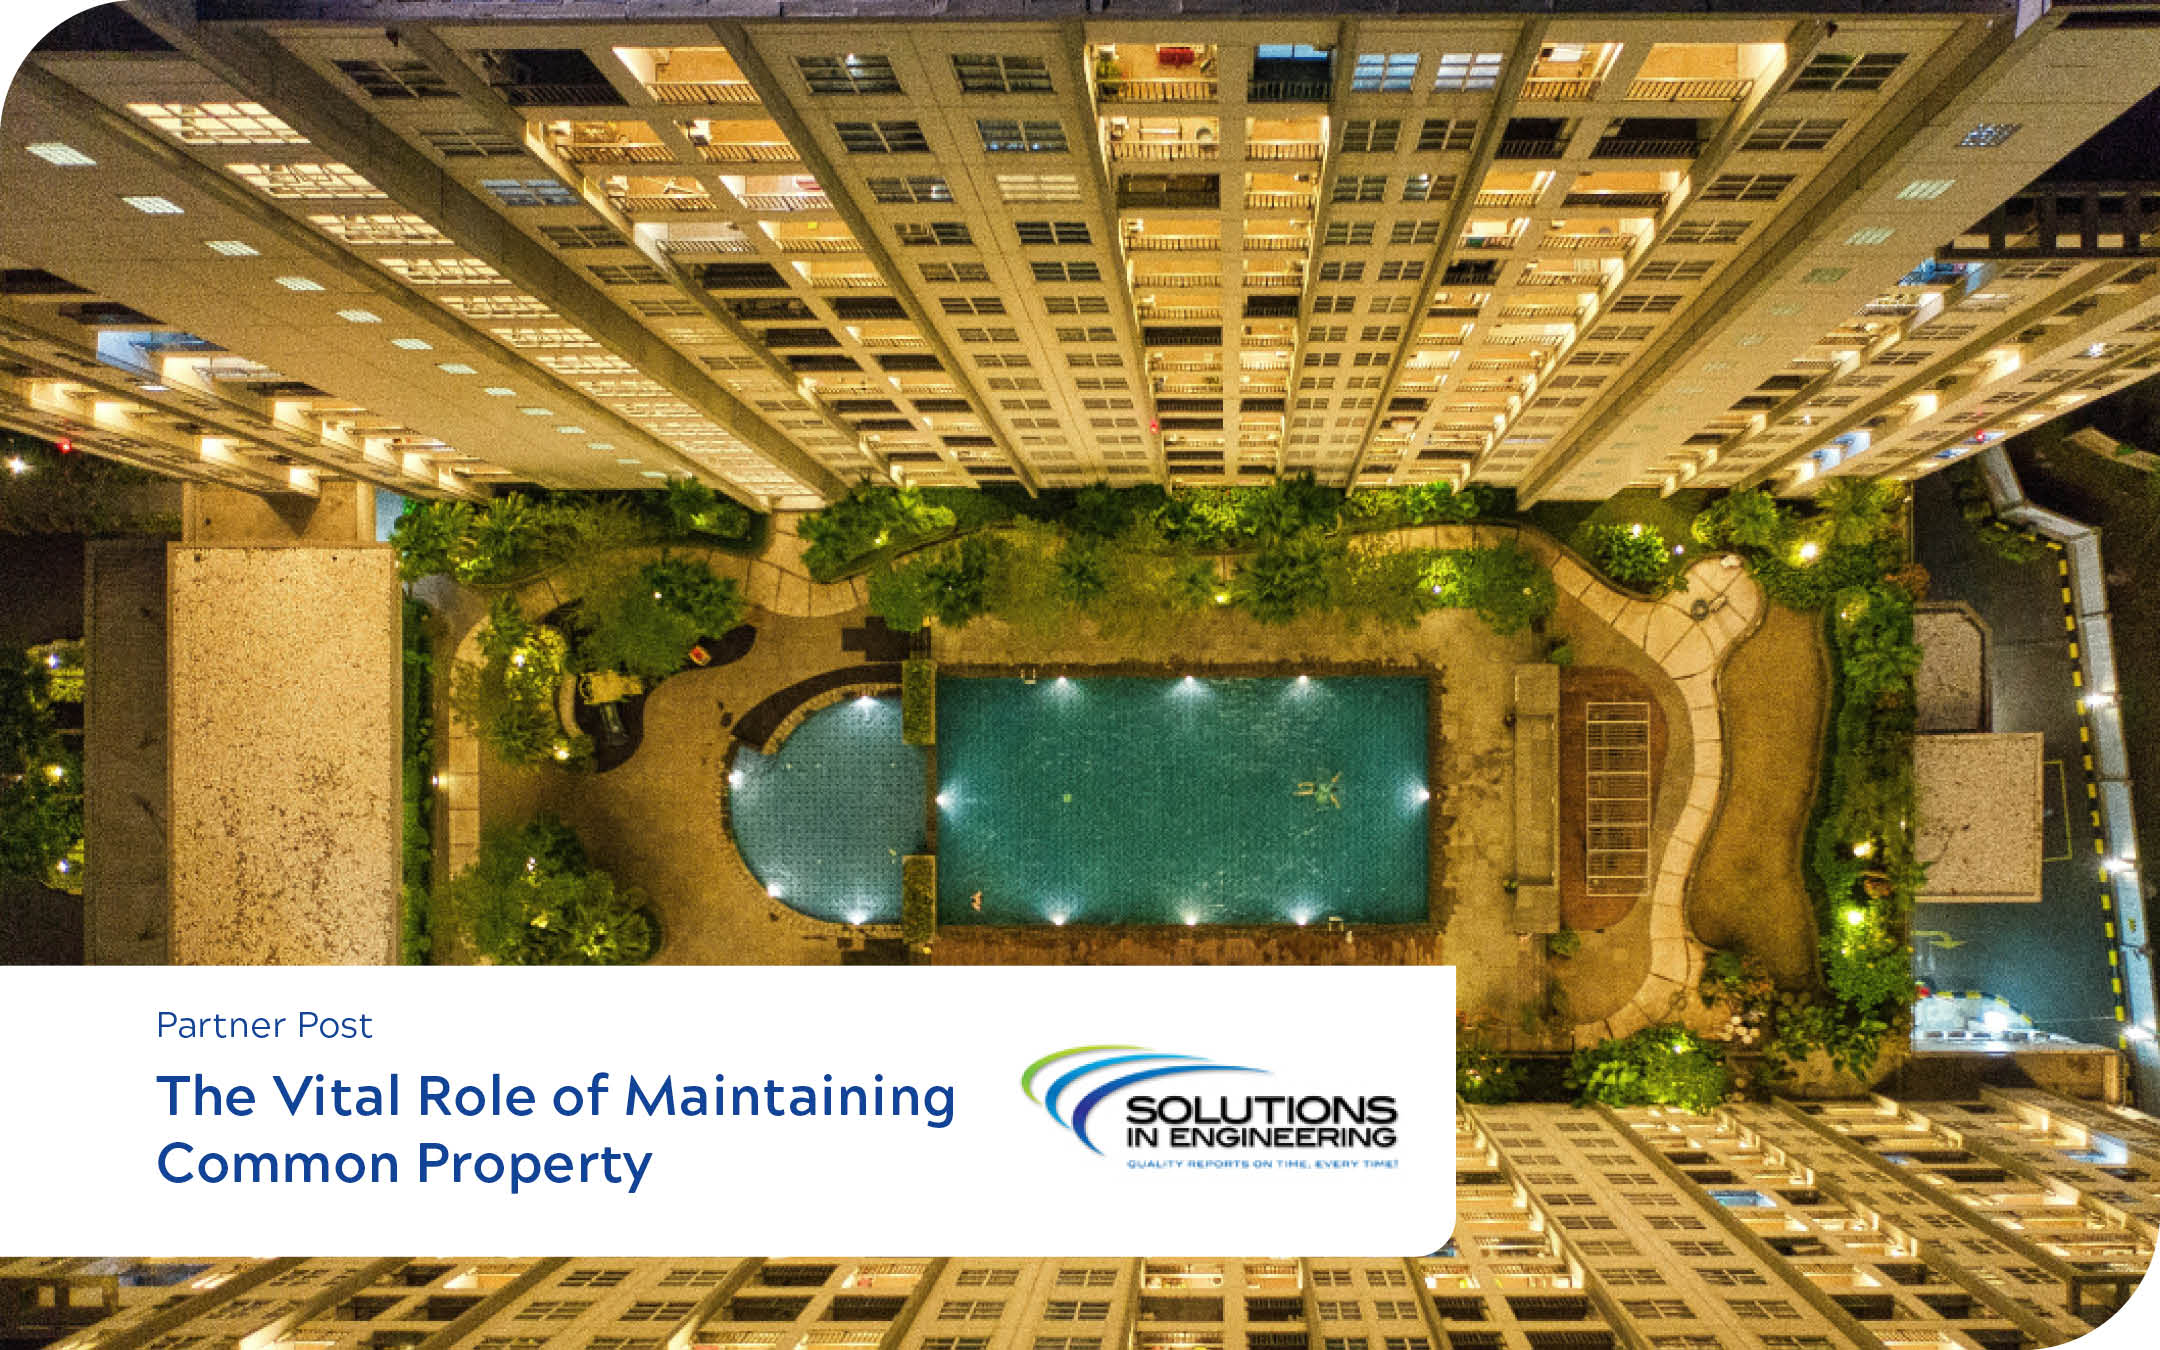 The Vital Role of Maintaining Common Property.